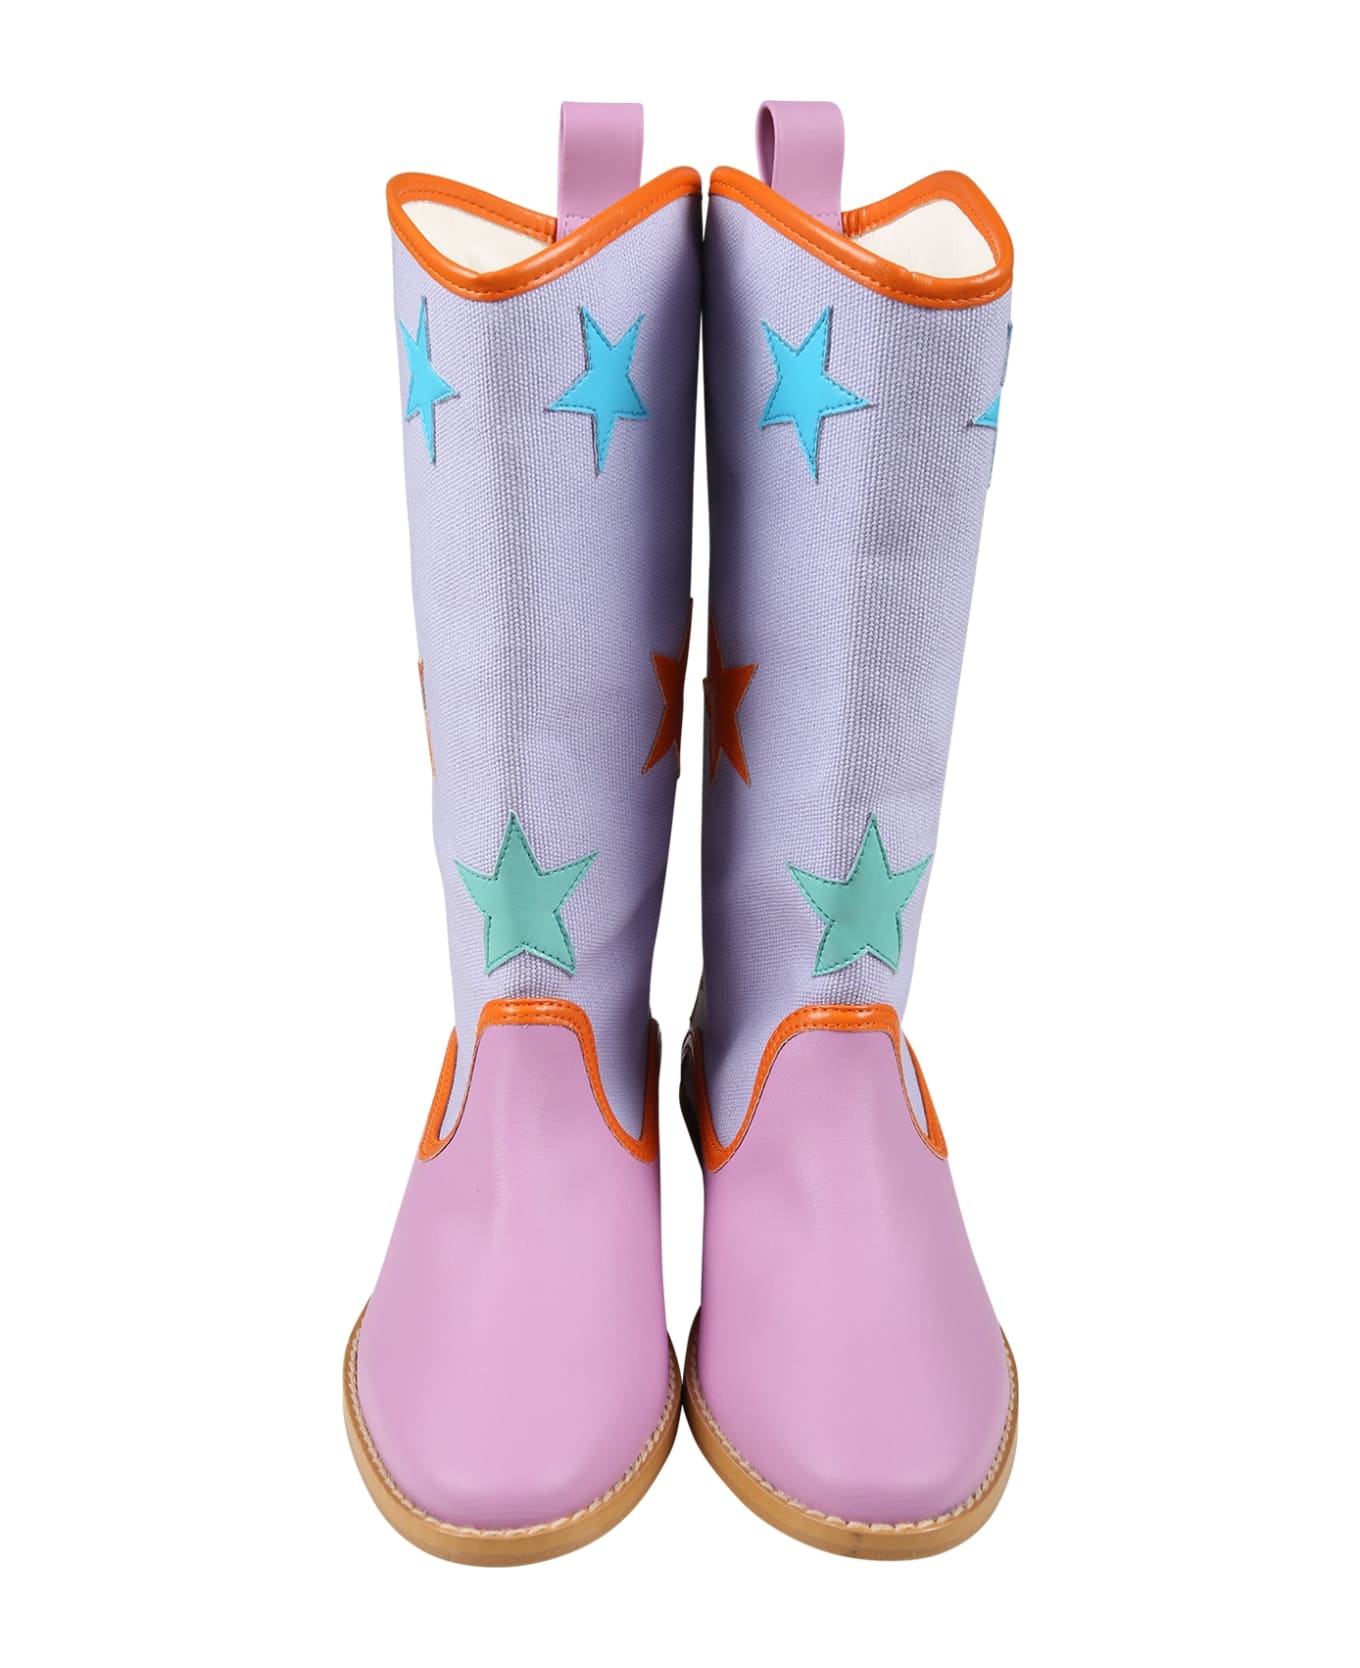 Stella McCartney Kids Puple Boots For Girl With Stars - Violet